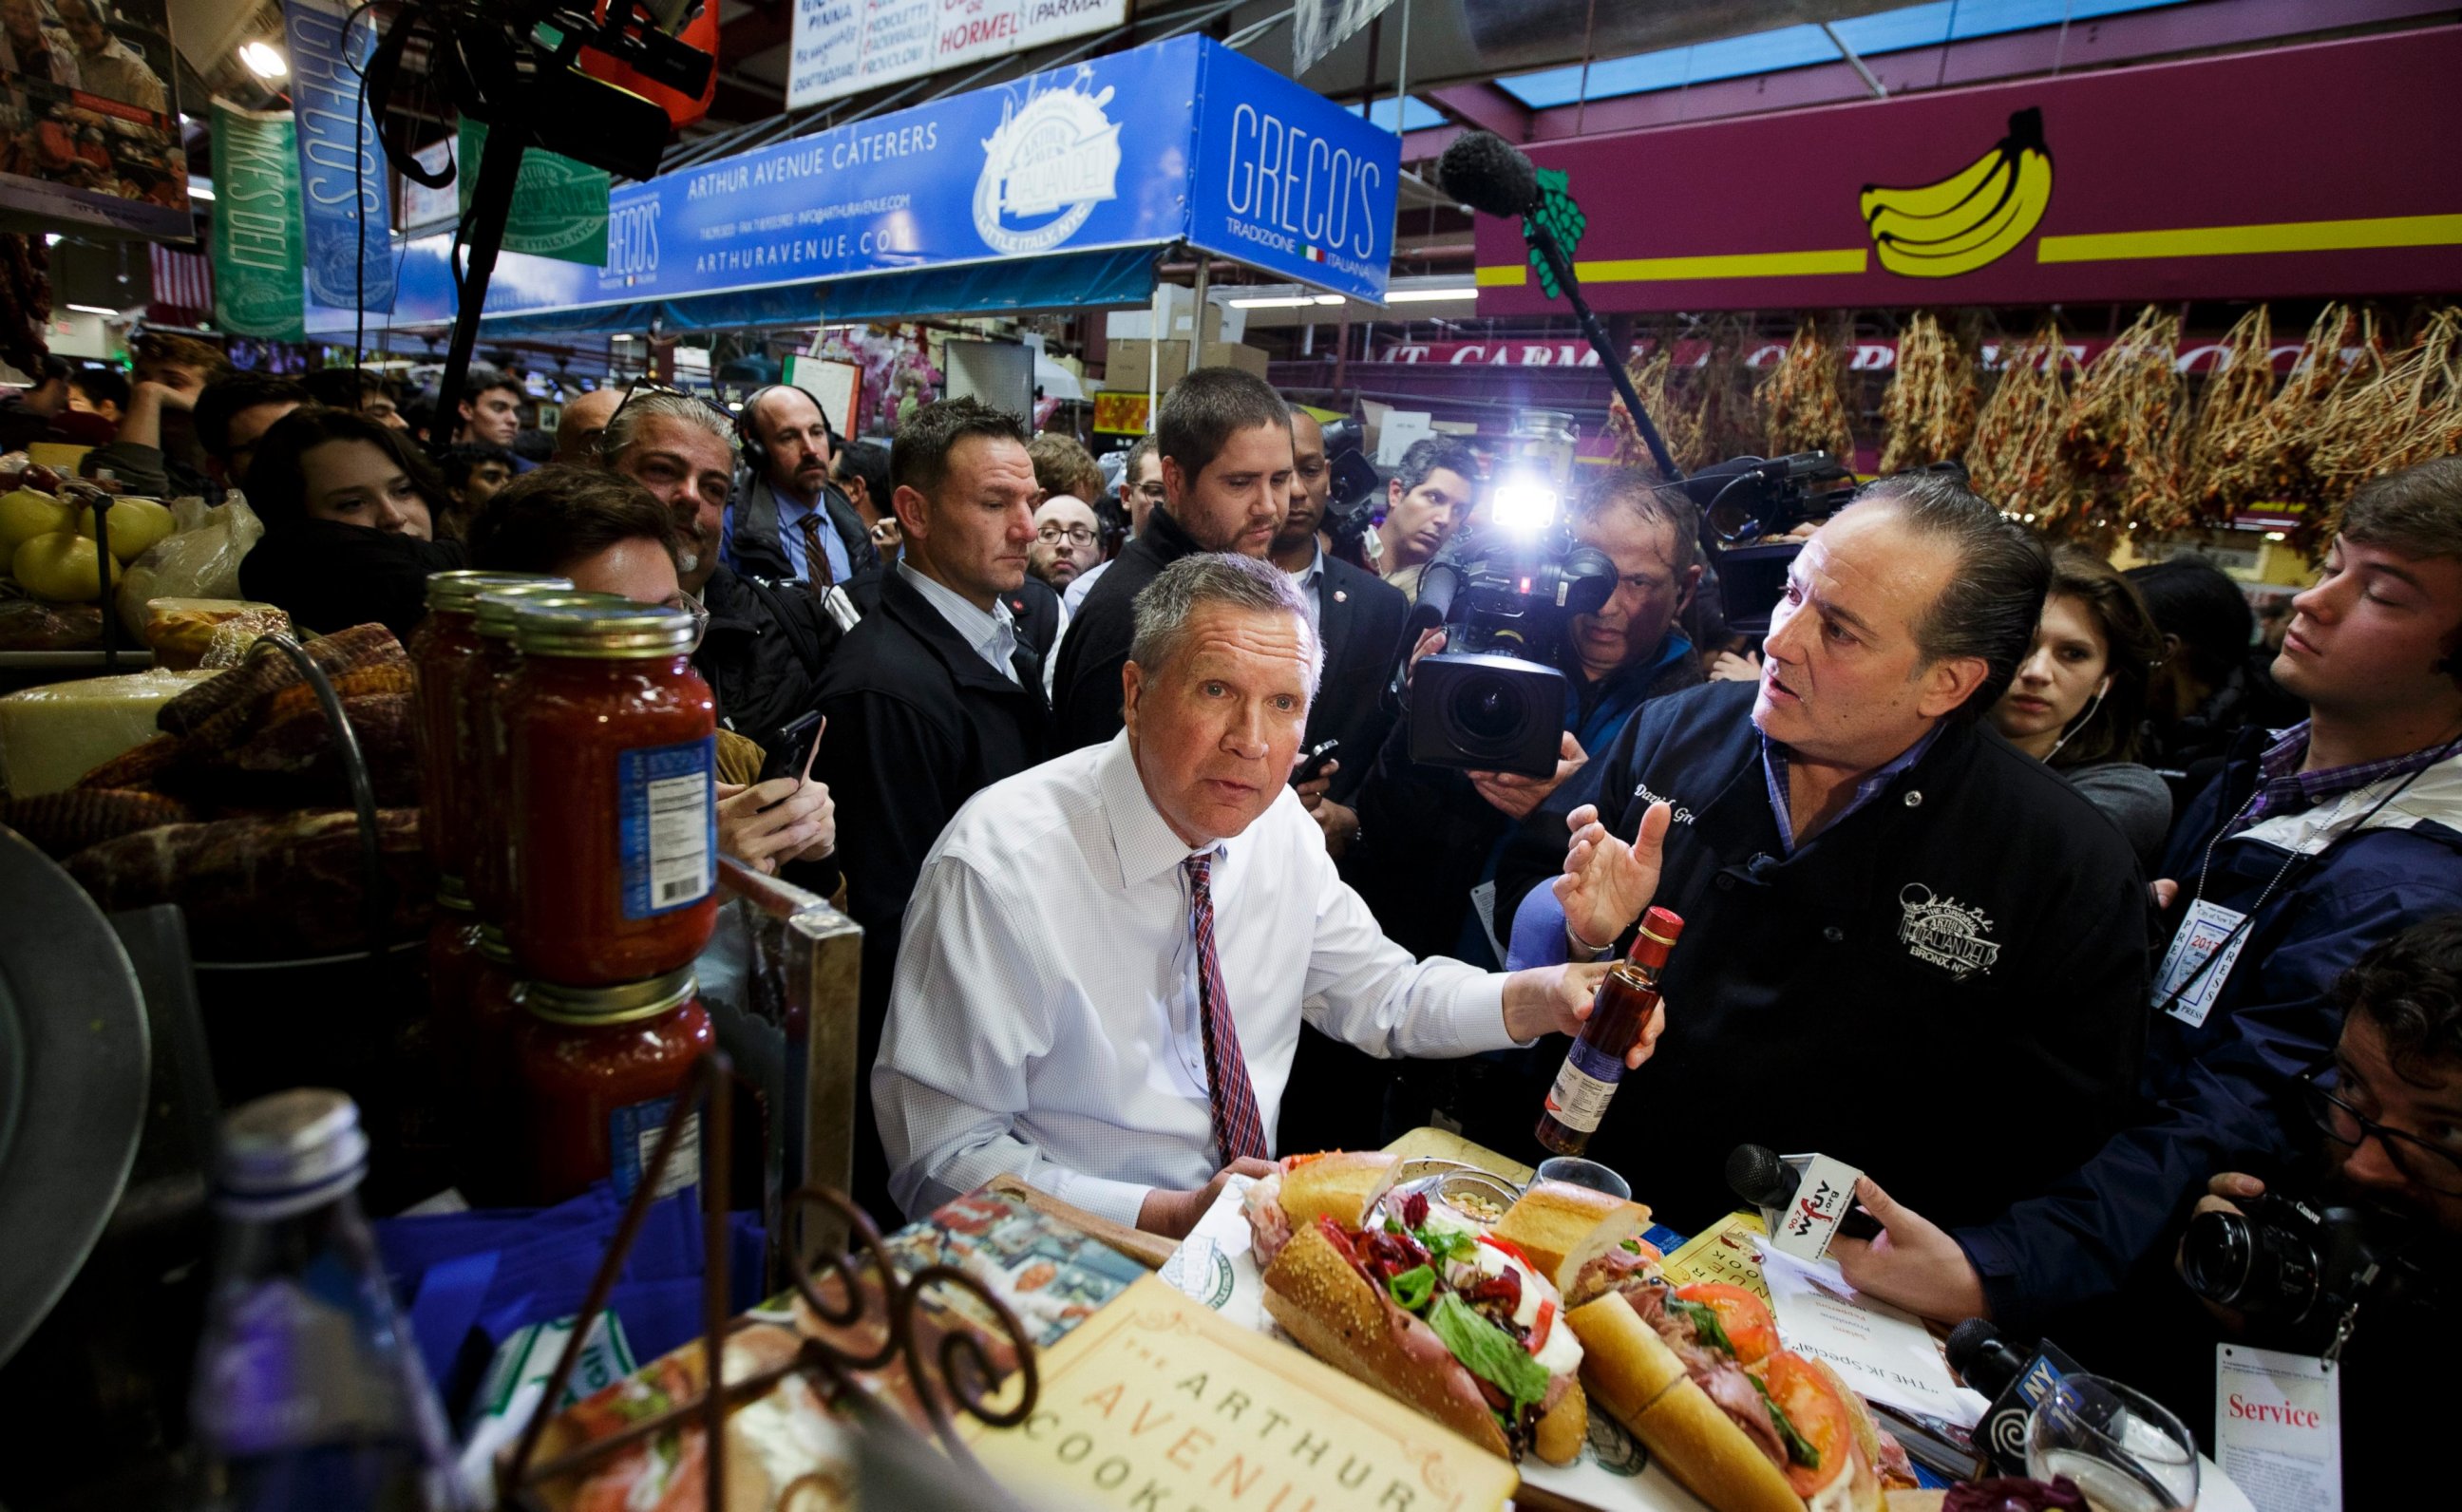 PHOTO: Republican presidential candidate, Ohio Gov. John Kasich, has lunch at Mike's Italian Deli during a campaign stop at the Arthur Avenue market in the Bronx, New York, April 7, 2016. New York will hold its primary election on April 19, 2016. 